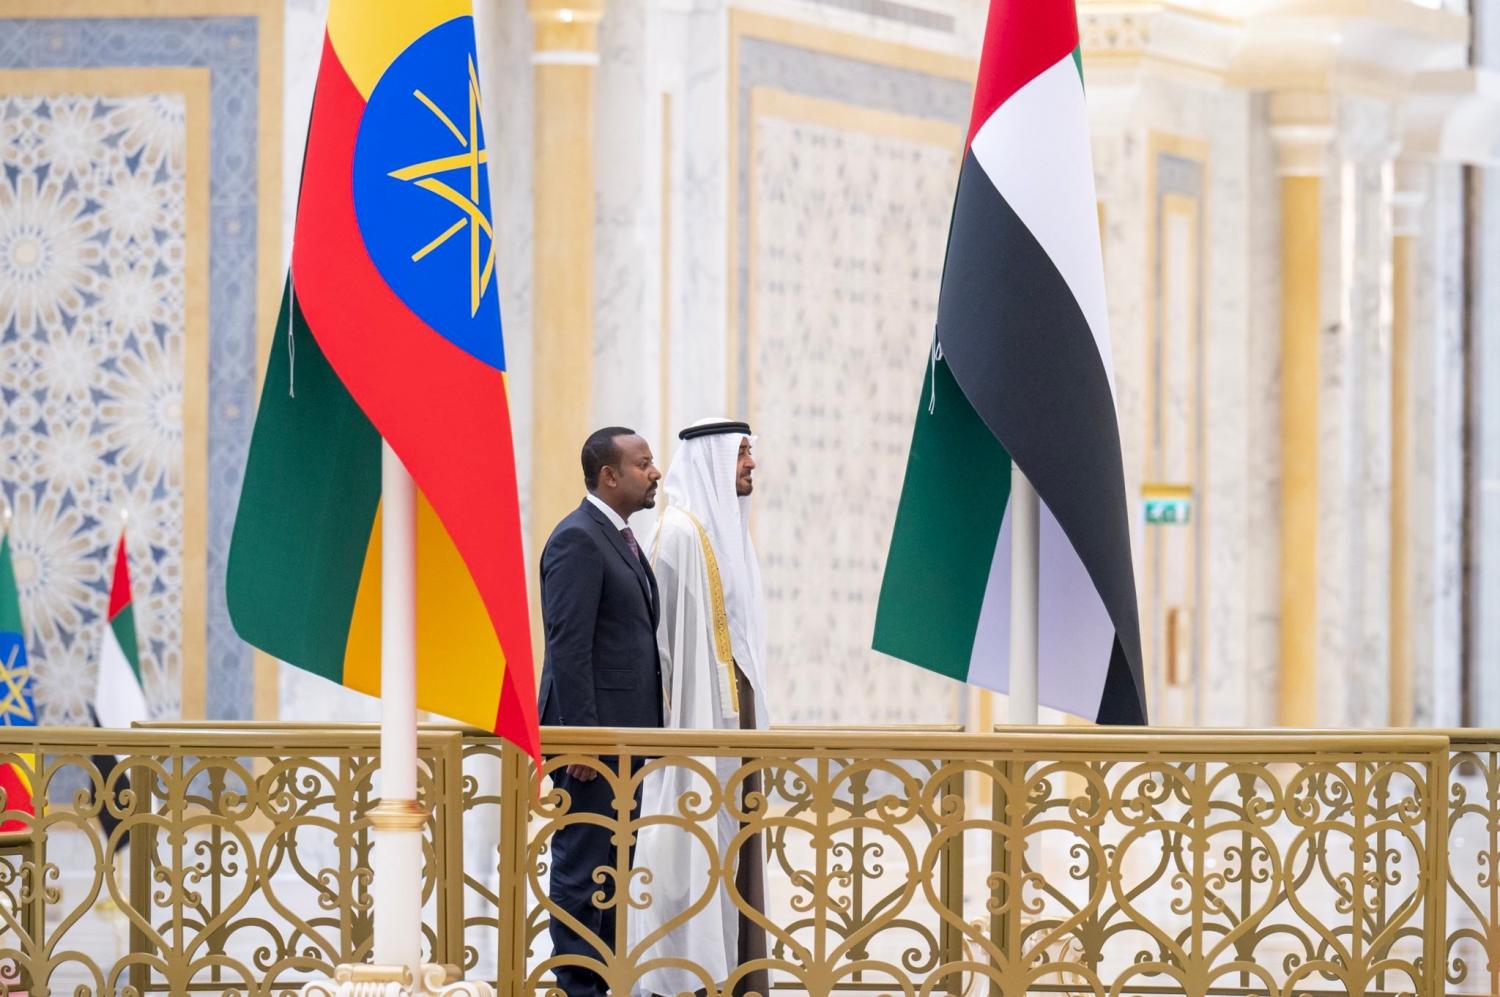 Sheikh Mohamed bin Zayed, the Crown Prince of Abu Dhabi and Deputy Supreme Commander of the United Arab Emirates UAE Armed Forces welcomes Ethiopian Prime Minister Abiy Ahmed Ali who arrives in Abu Dhabi for official visit on Saturday Jan 29, 2022.